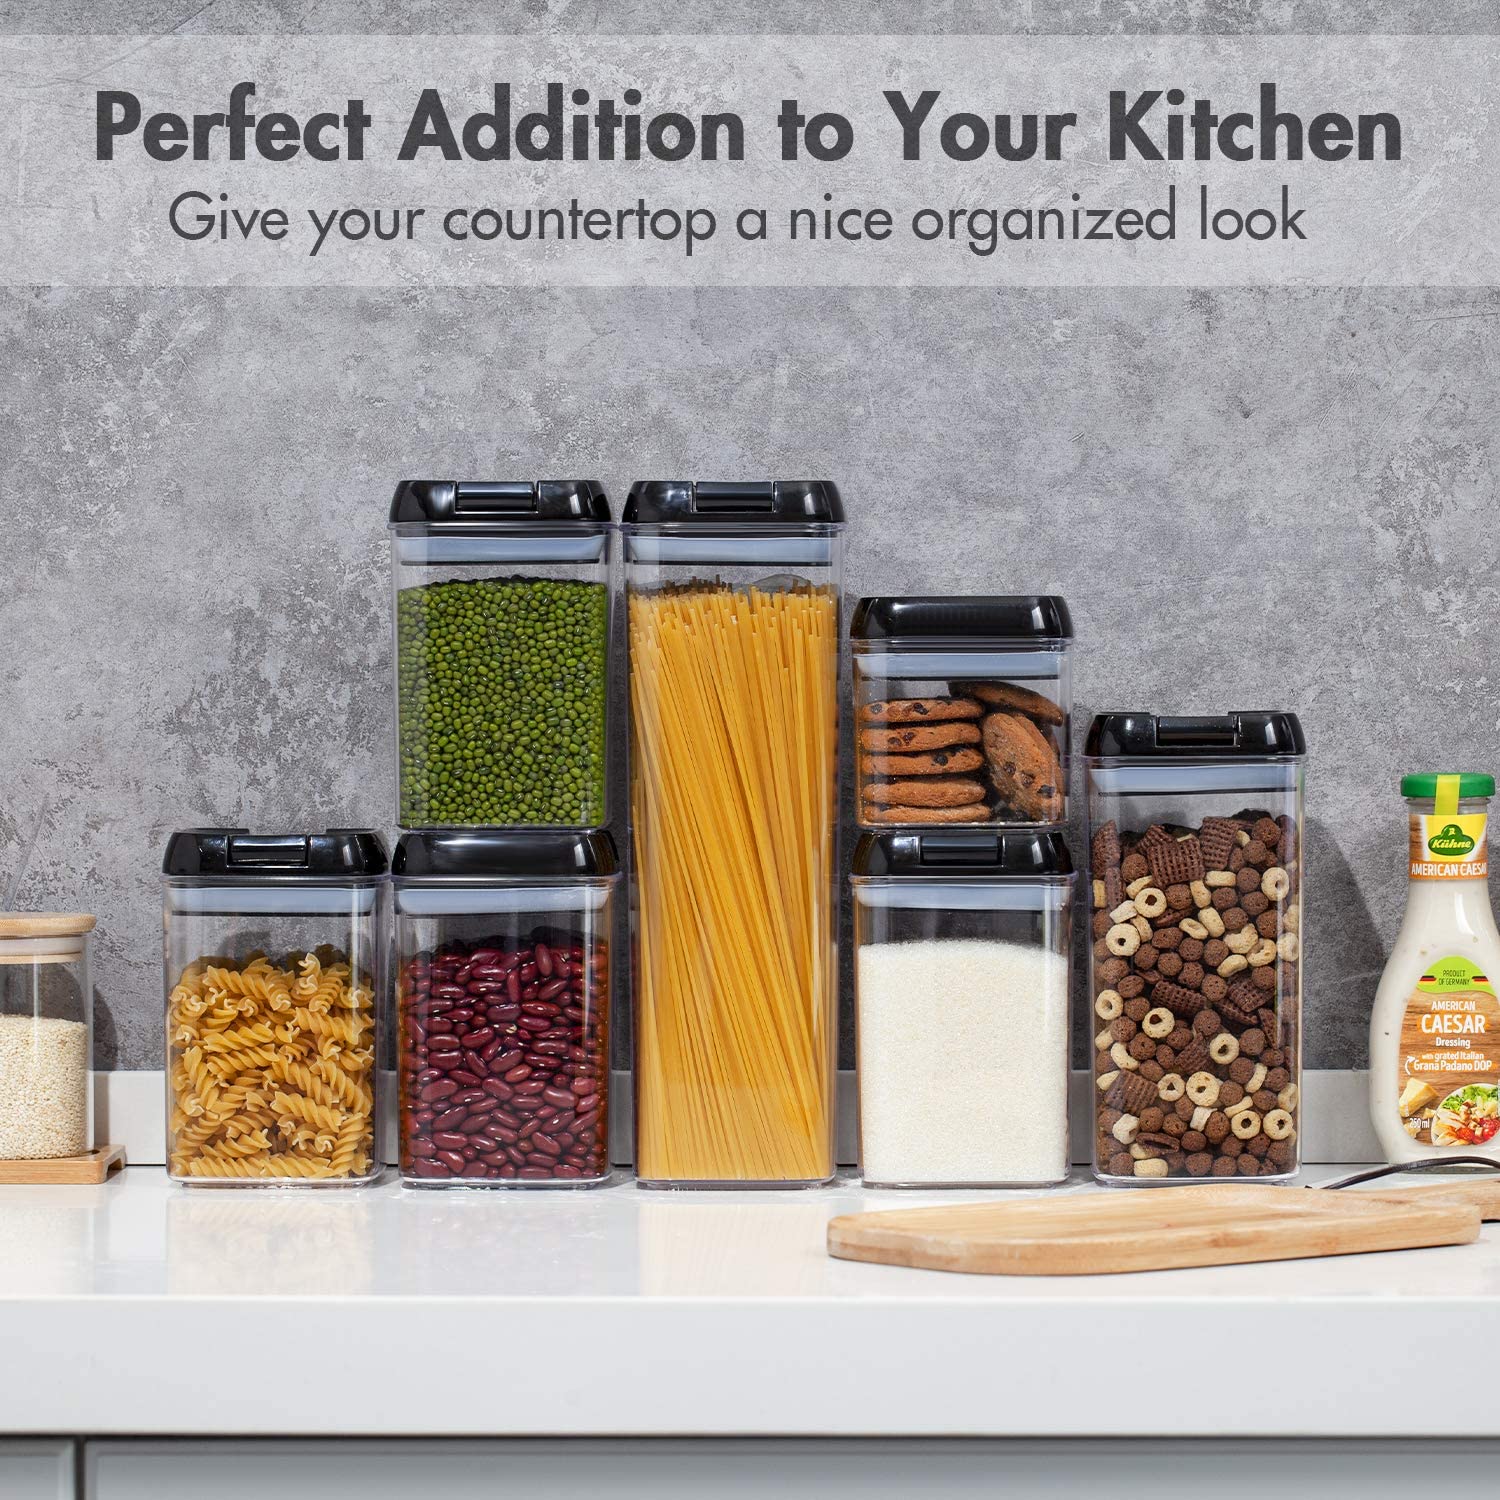 Best Kitchen Storage Containers Online: 7 Kitchen Containers To Elevate The  Look Of Your kitchen